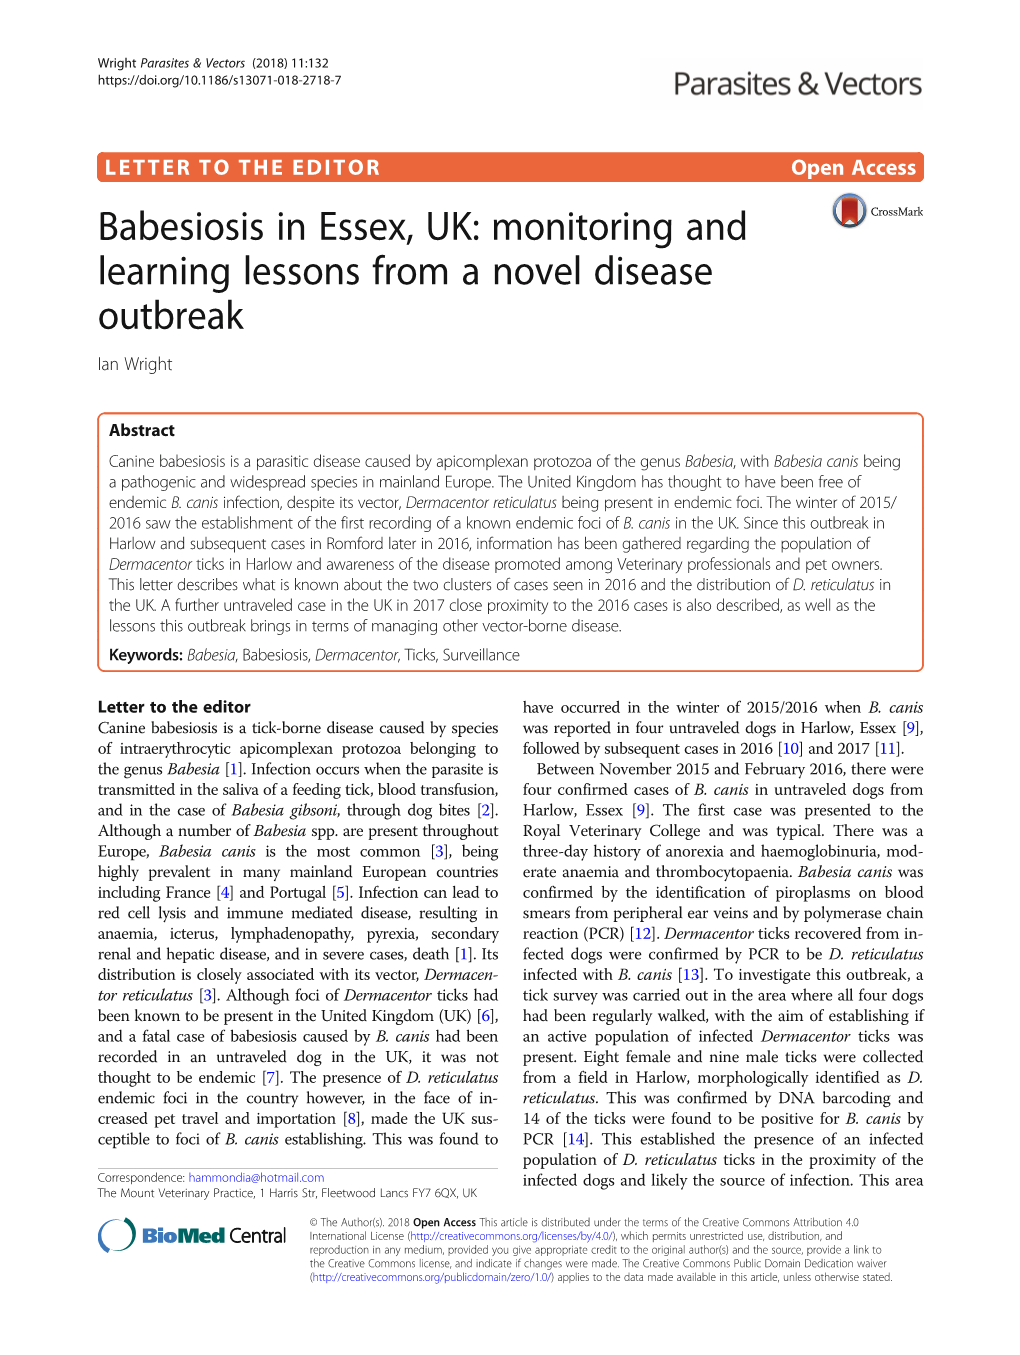 Babesiosis in Essex, UK: Monitoring and Learning Lessons from a Novel Disease Outbreak Ian Wright